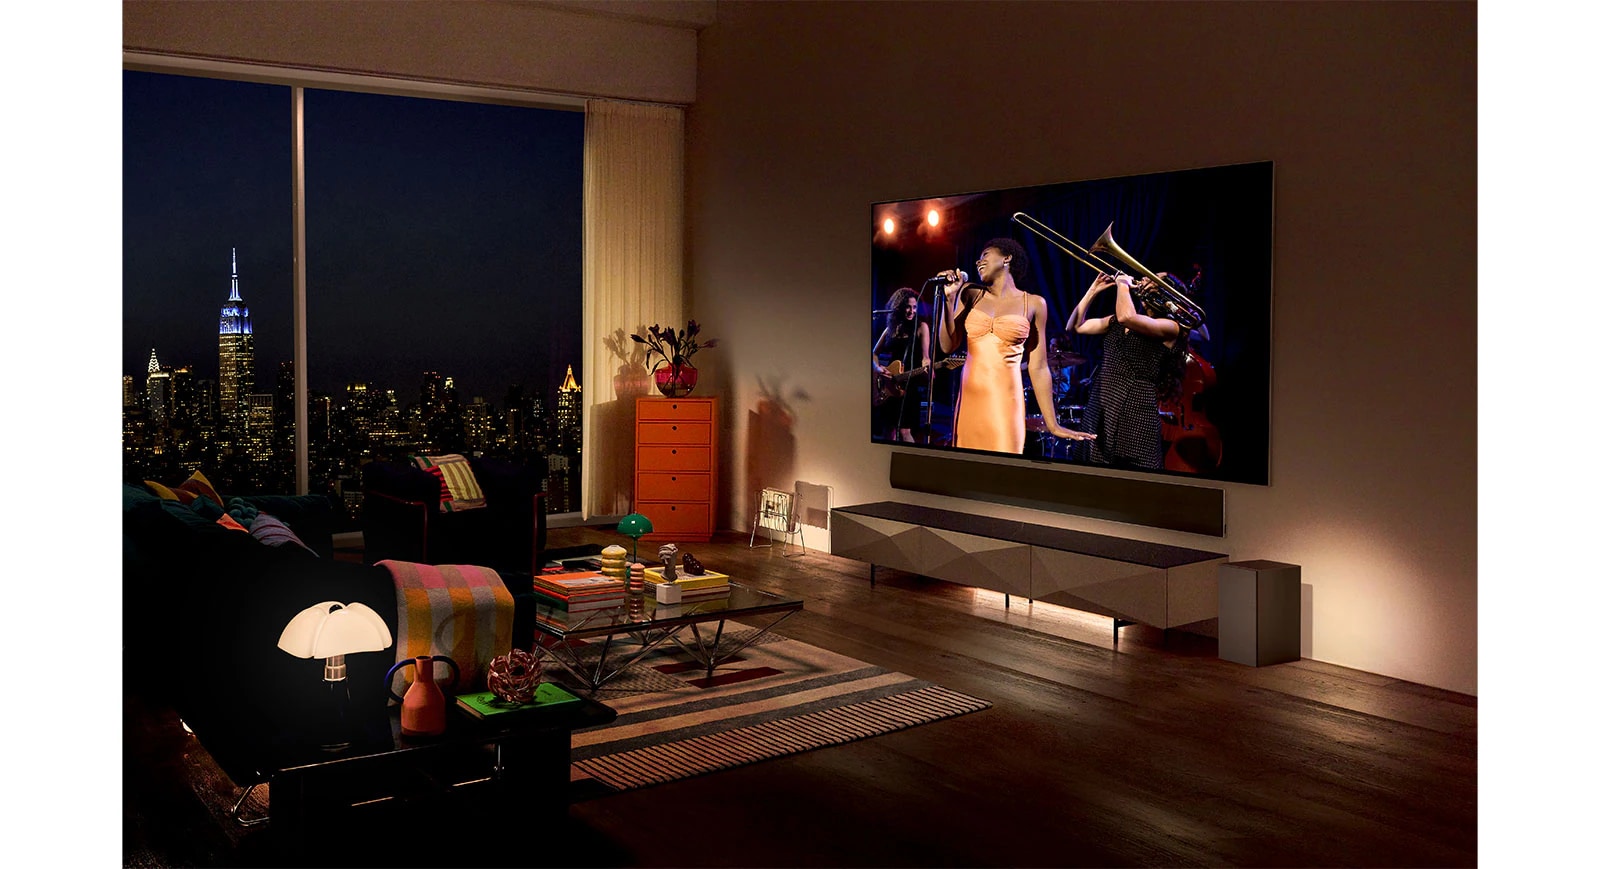 LG launching 100 inch Laser TV in April